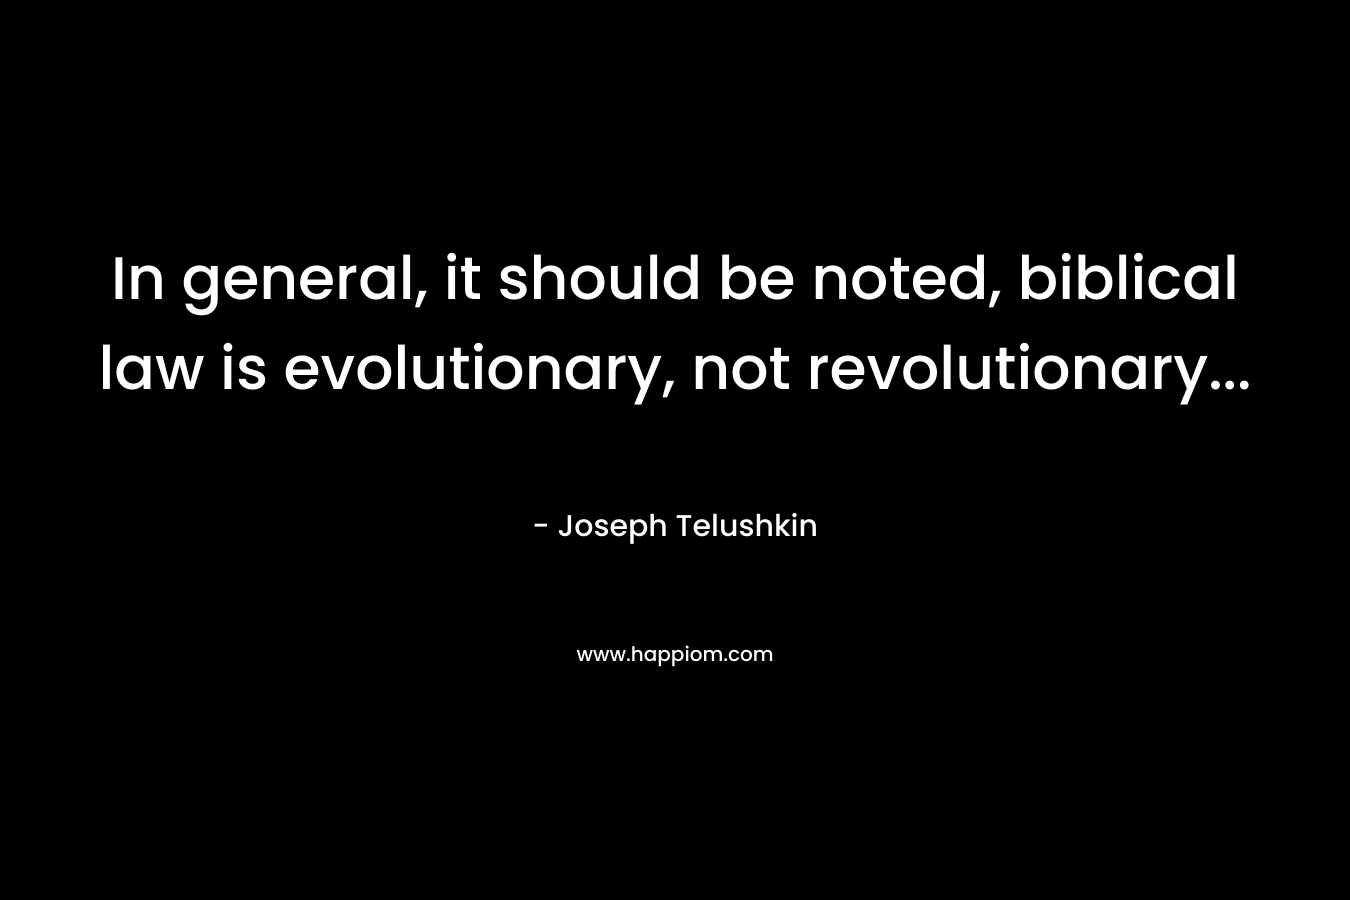 In general, it should be noted, biblical law is evolutionary, not revolutionary… – Joseph Telushkin